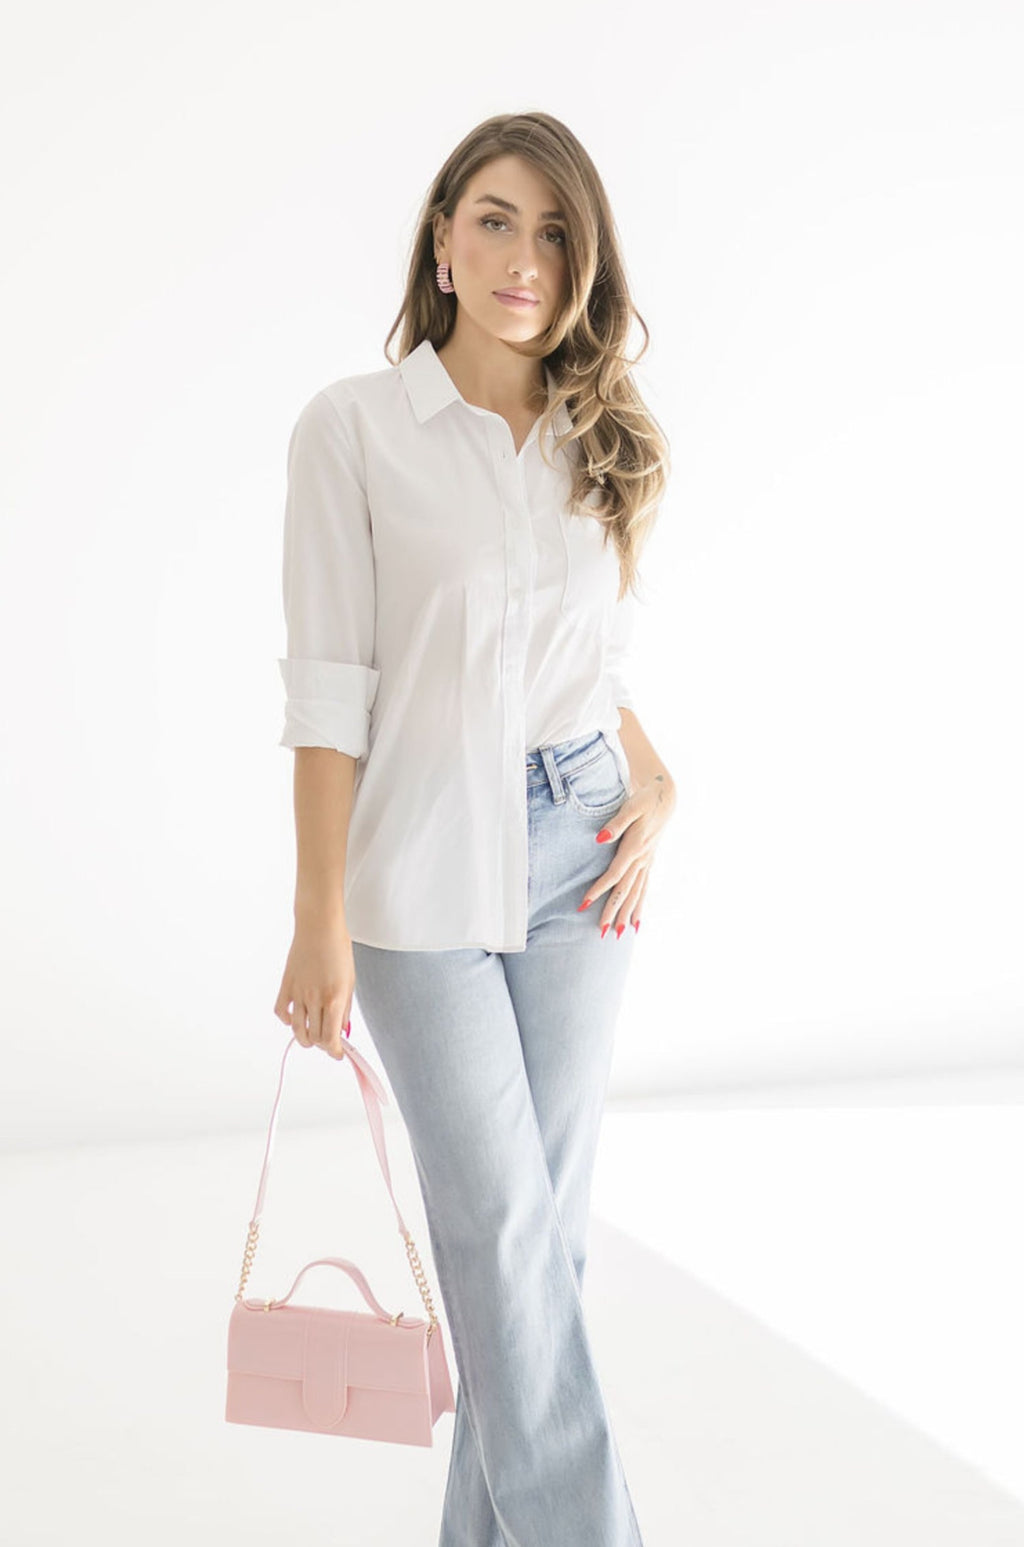 Long Sleeve Button Down Top White